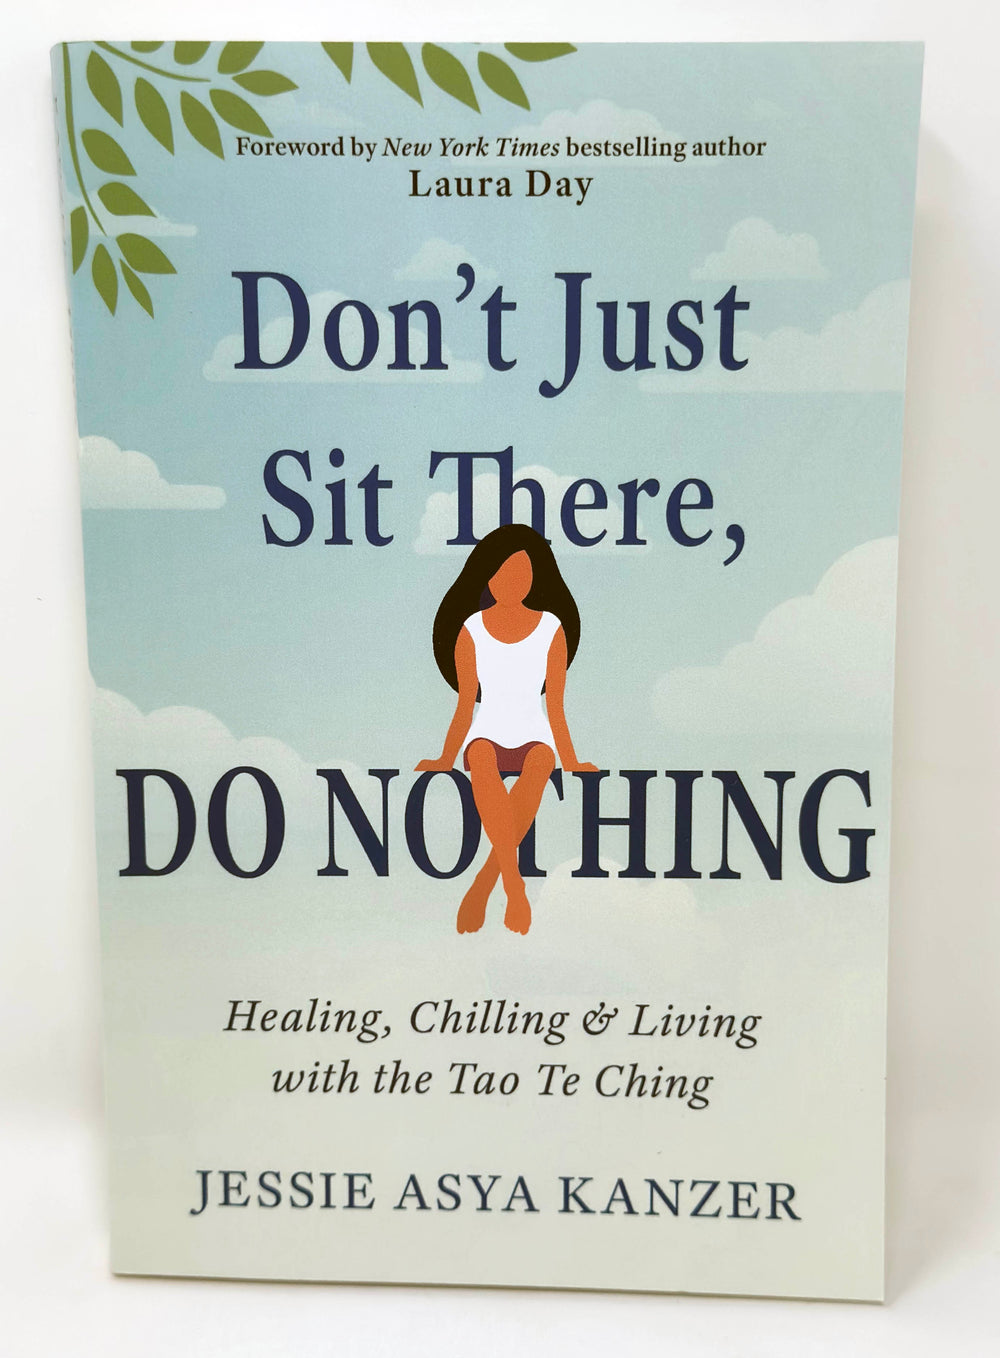 Don't Just Sit There, Do Nothing